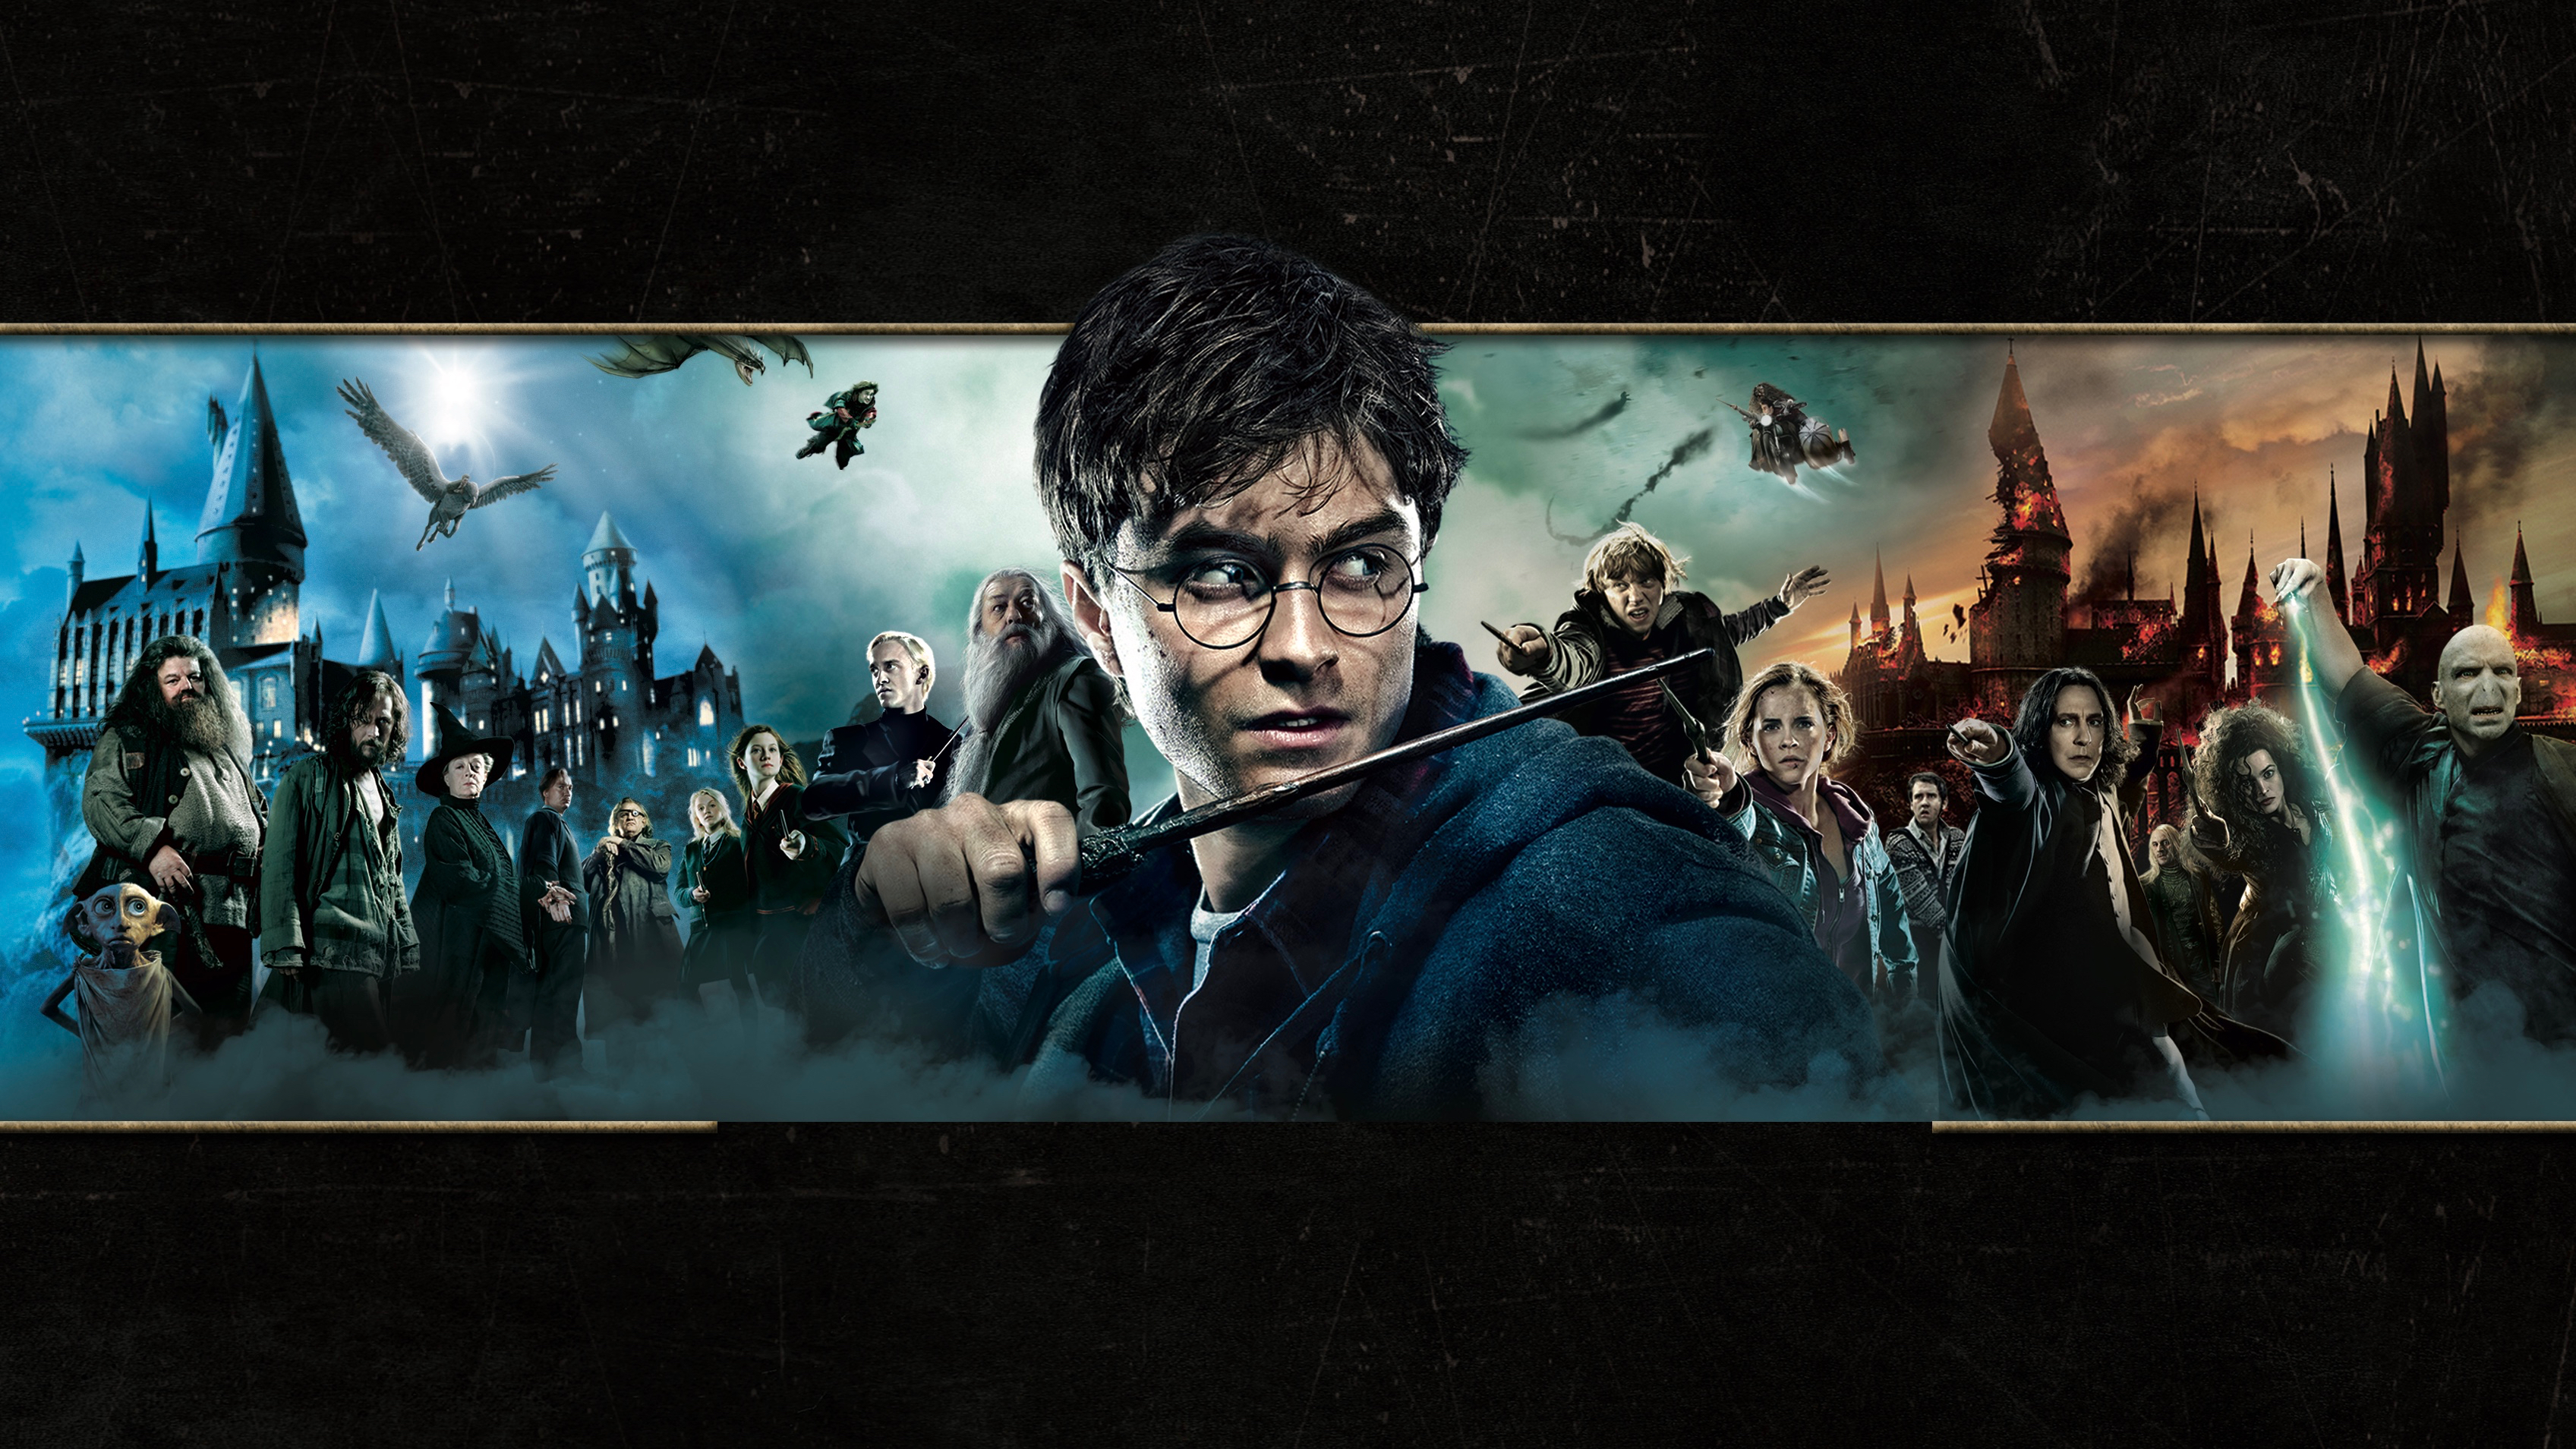 Funny Harry Potter Wallpapers